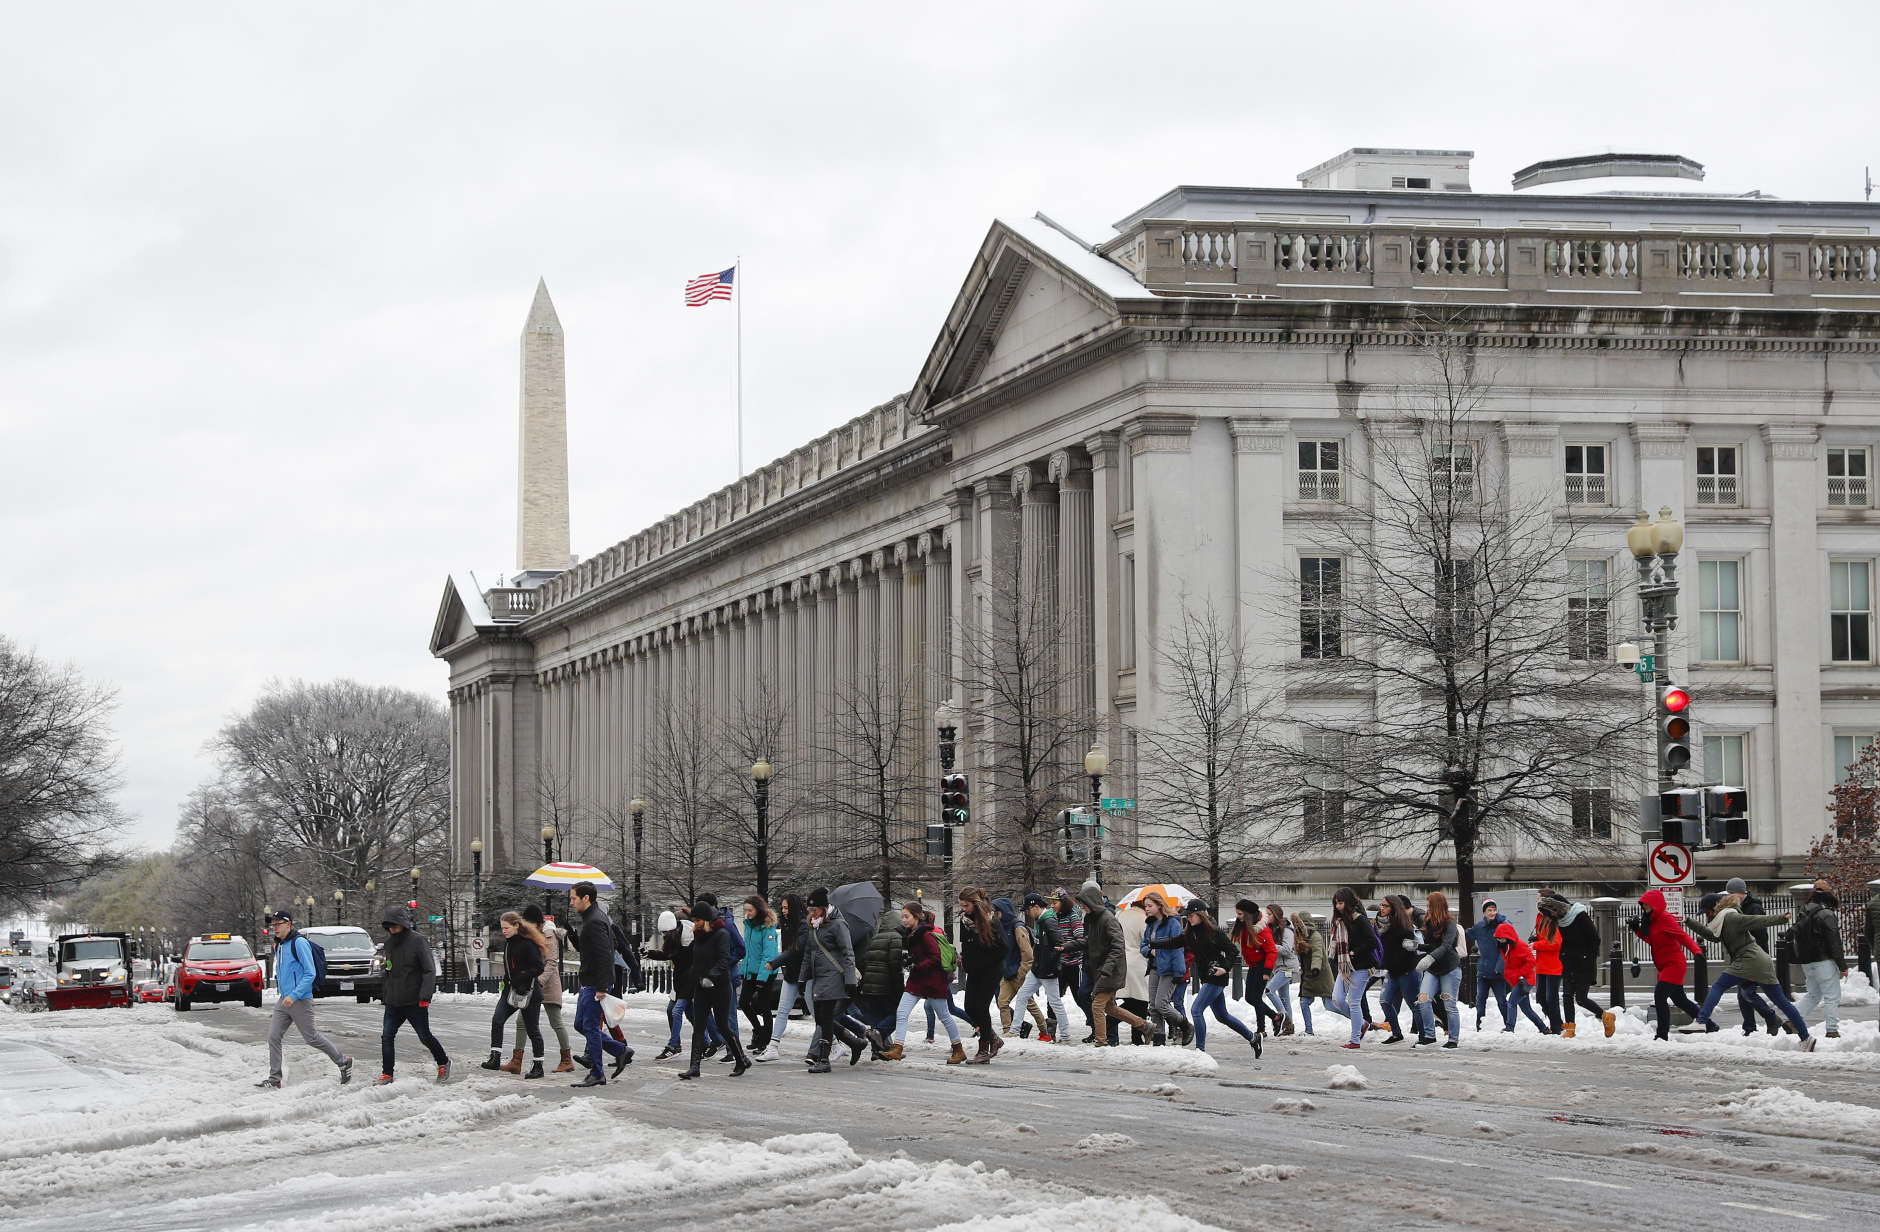 People cross 15th Street NW at the Treasury building, looking toward the Washington Monument in downtown Washington, Tuesday, March 14, 2017. A late-season storm is dumping a messy mix of snow, sleet and rain on the mid-Atlantic, complicating travel, knocking out power and closing schools and government offices around the region. (AP Photo/Pablo Martinez Monsivais)